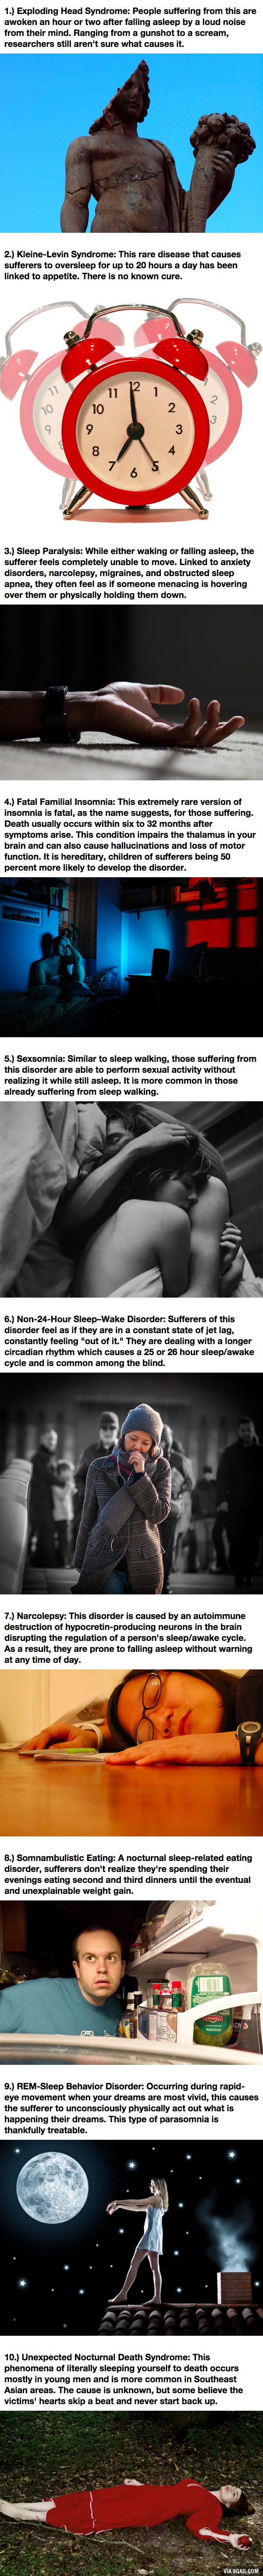 these 10 sleep disorders are terrifying and some are even dangerous to your health